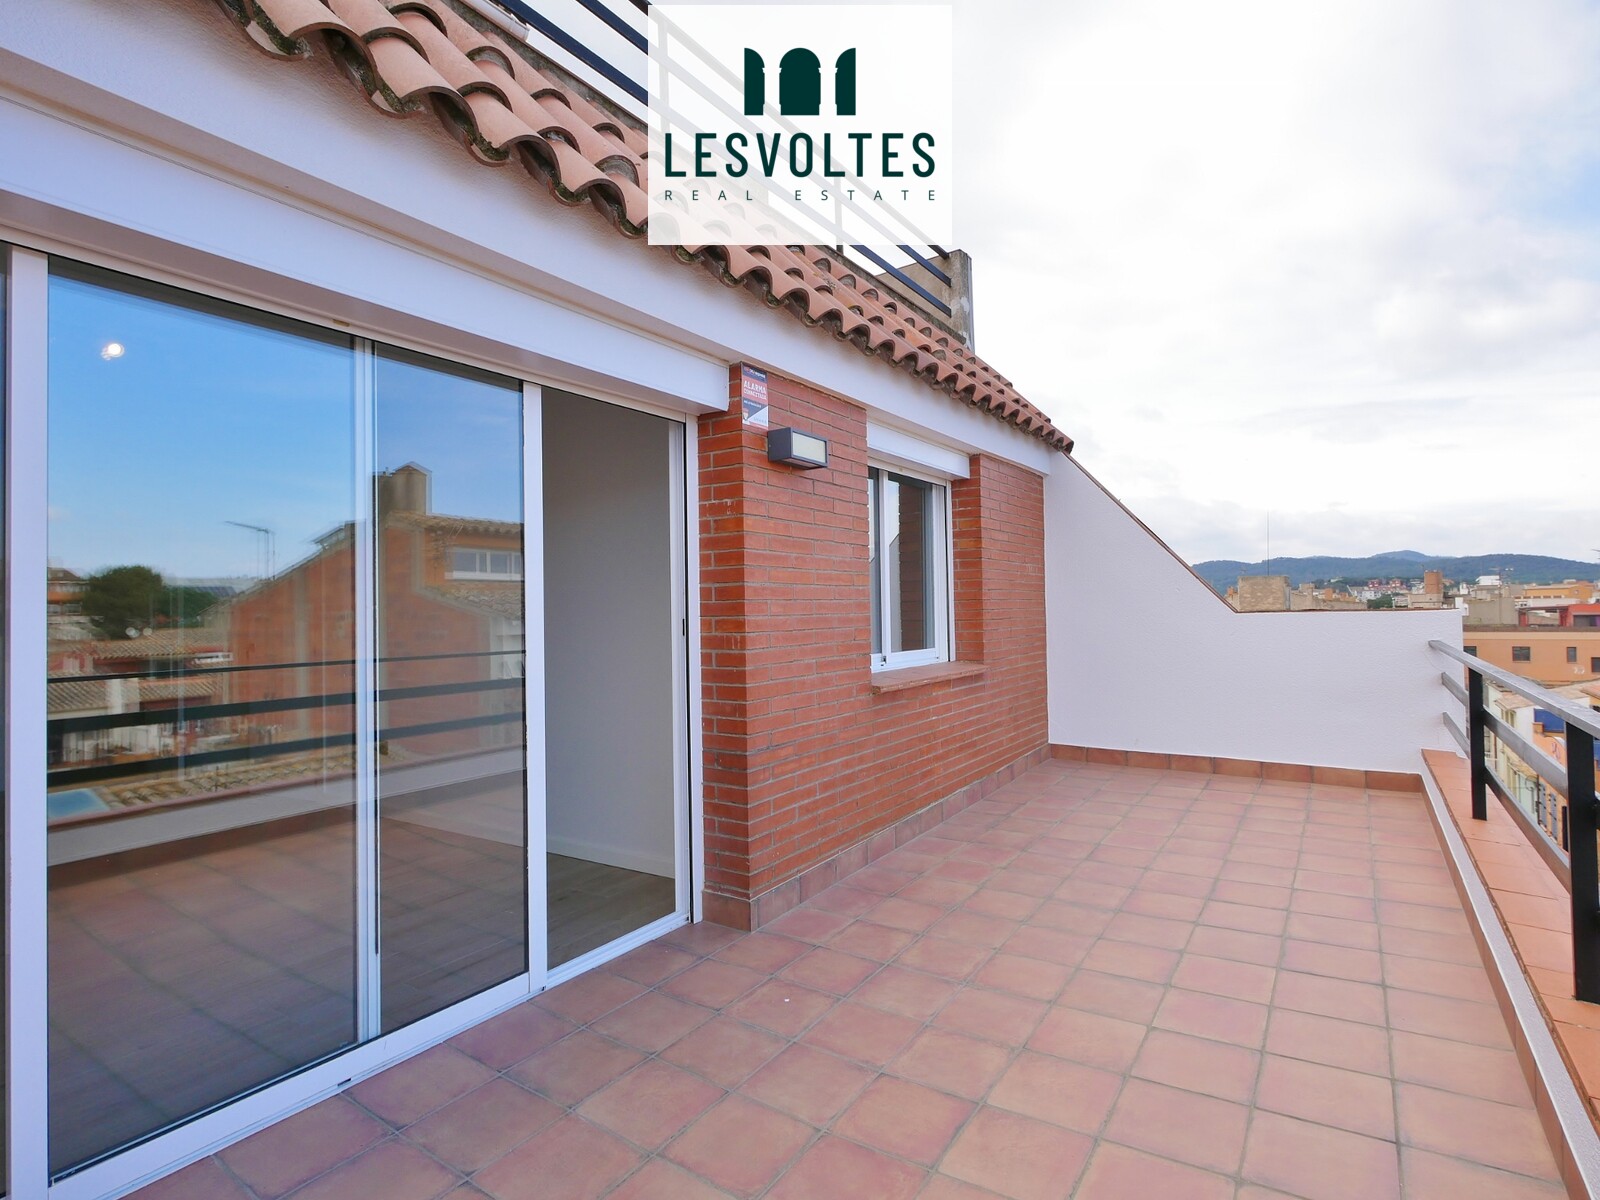 BRAND NEW 3 BEDROOM APARTMENT IN THE CENTER OF PALAFRUGELL